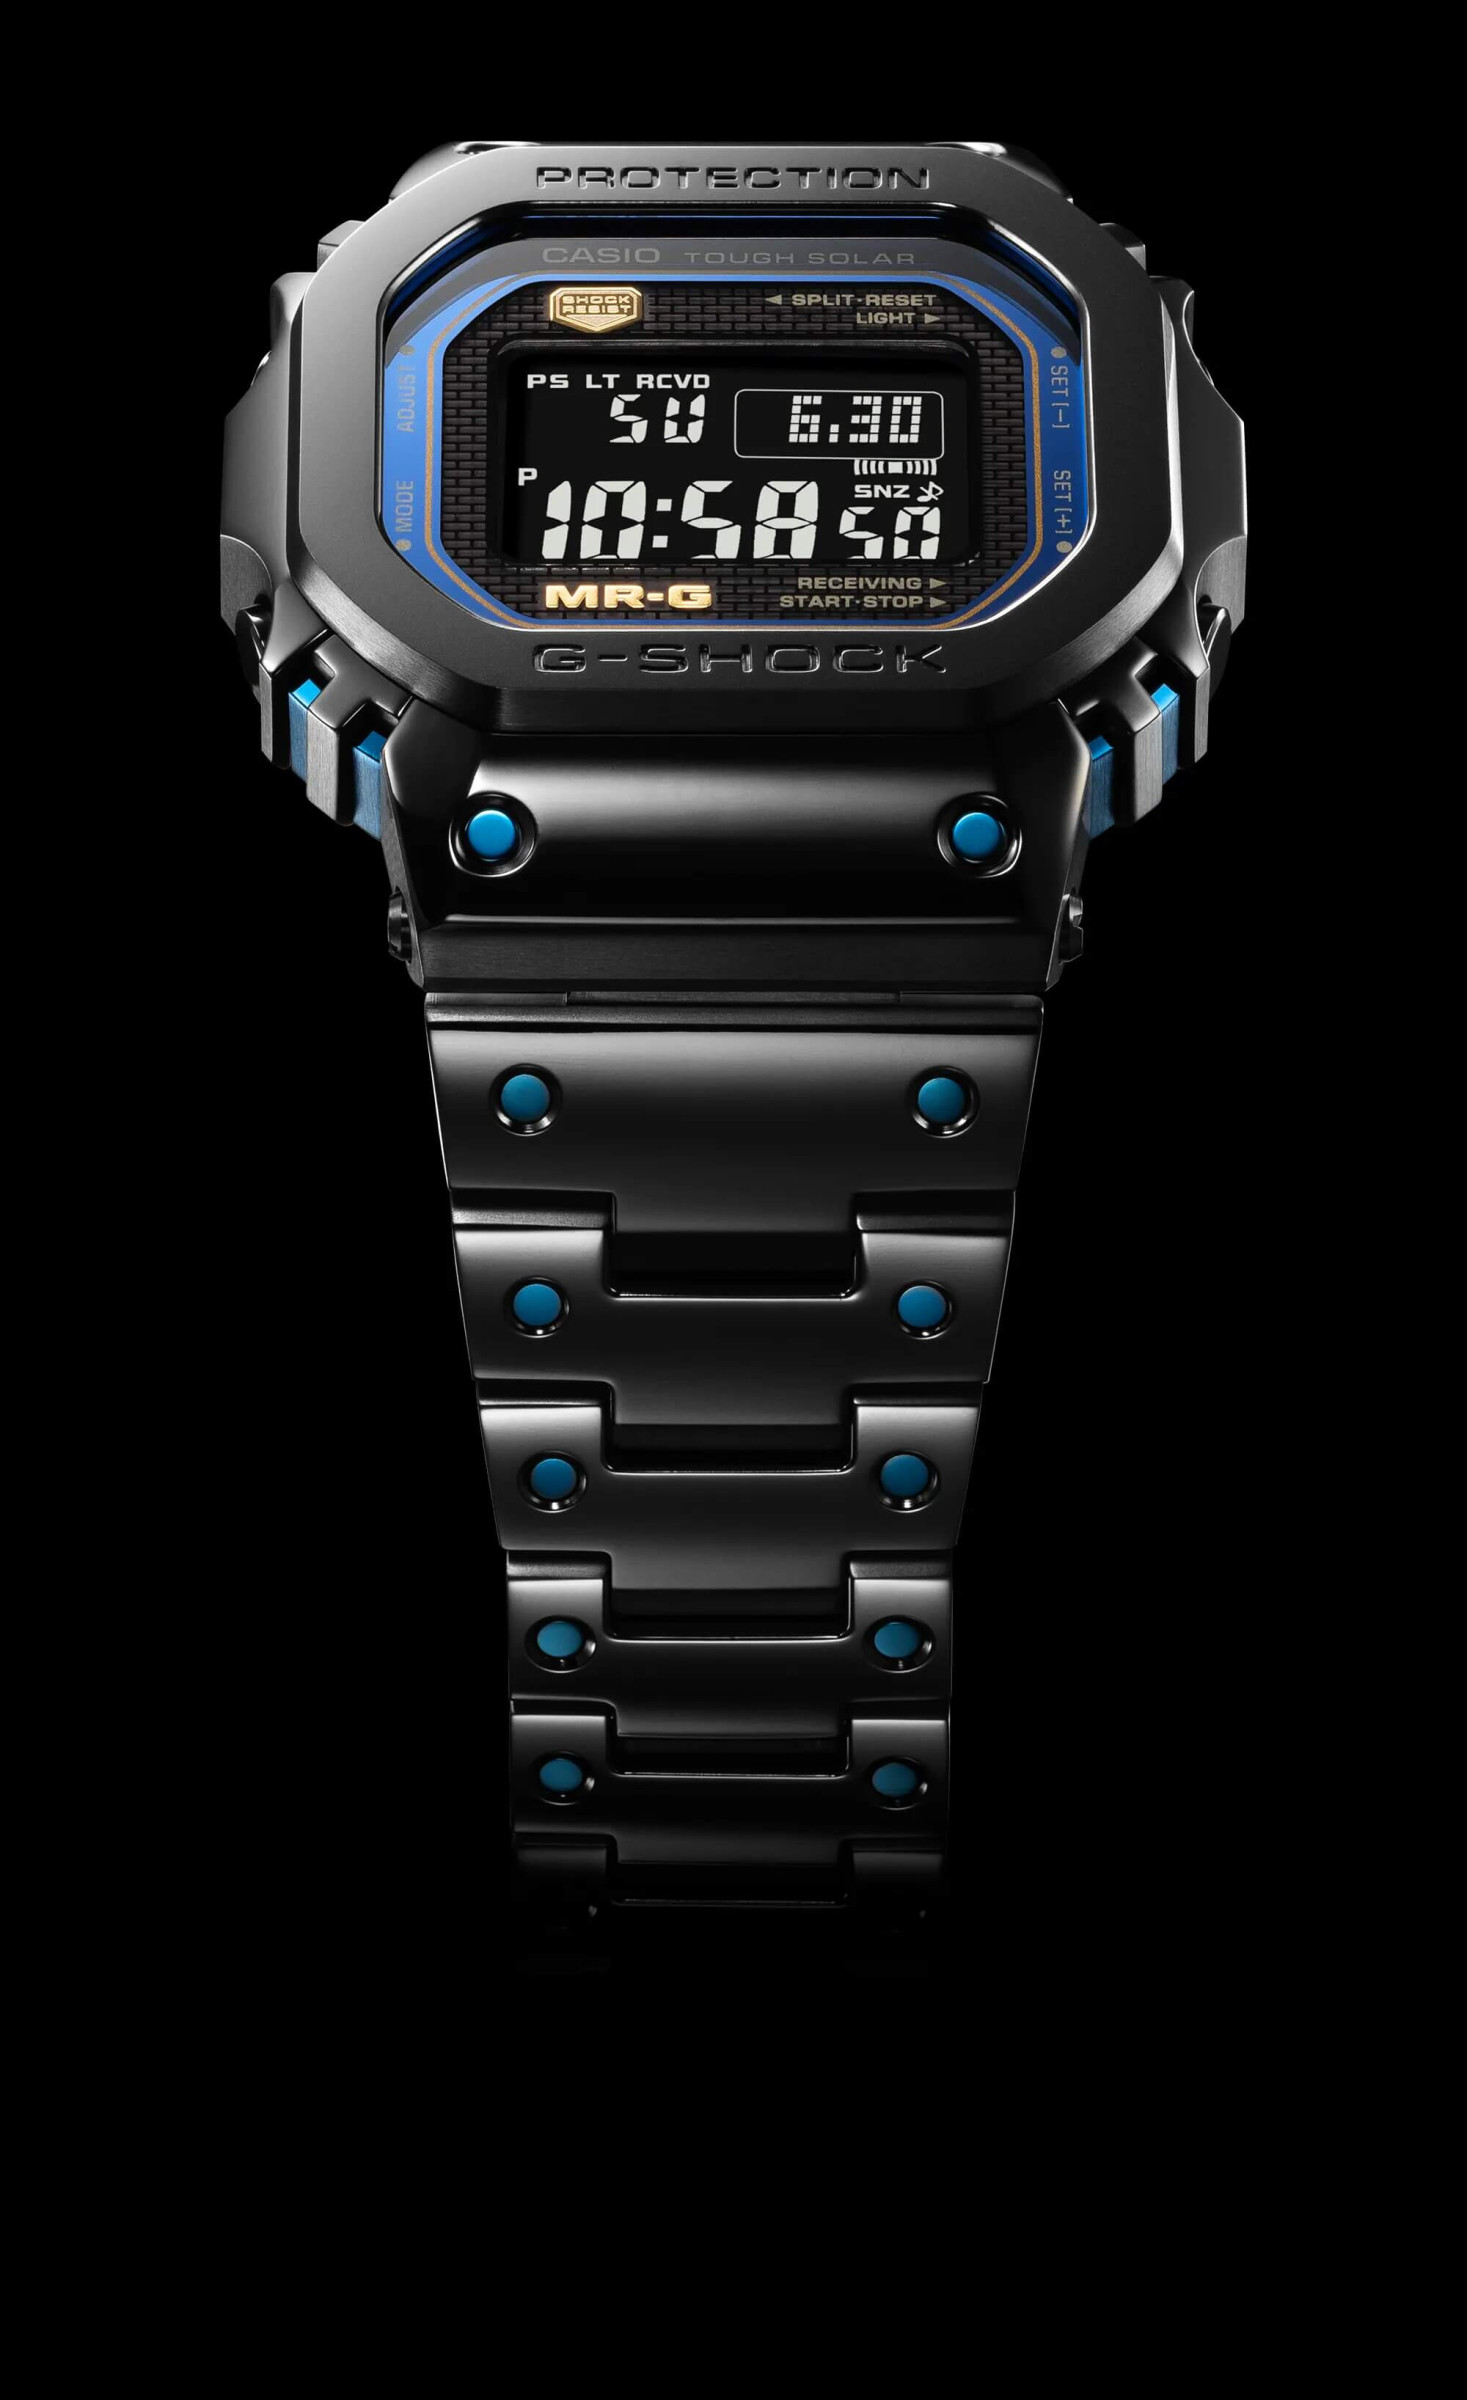 G-Shock MR-G Kiwami. Ao-zumi blue design in premium Casio square style. Plated with a black Diamond-like carbon coating.